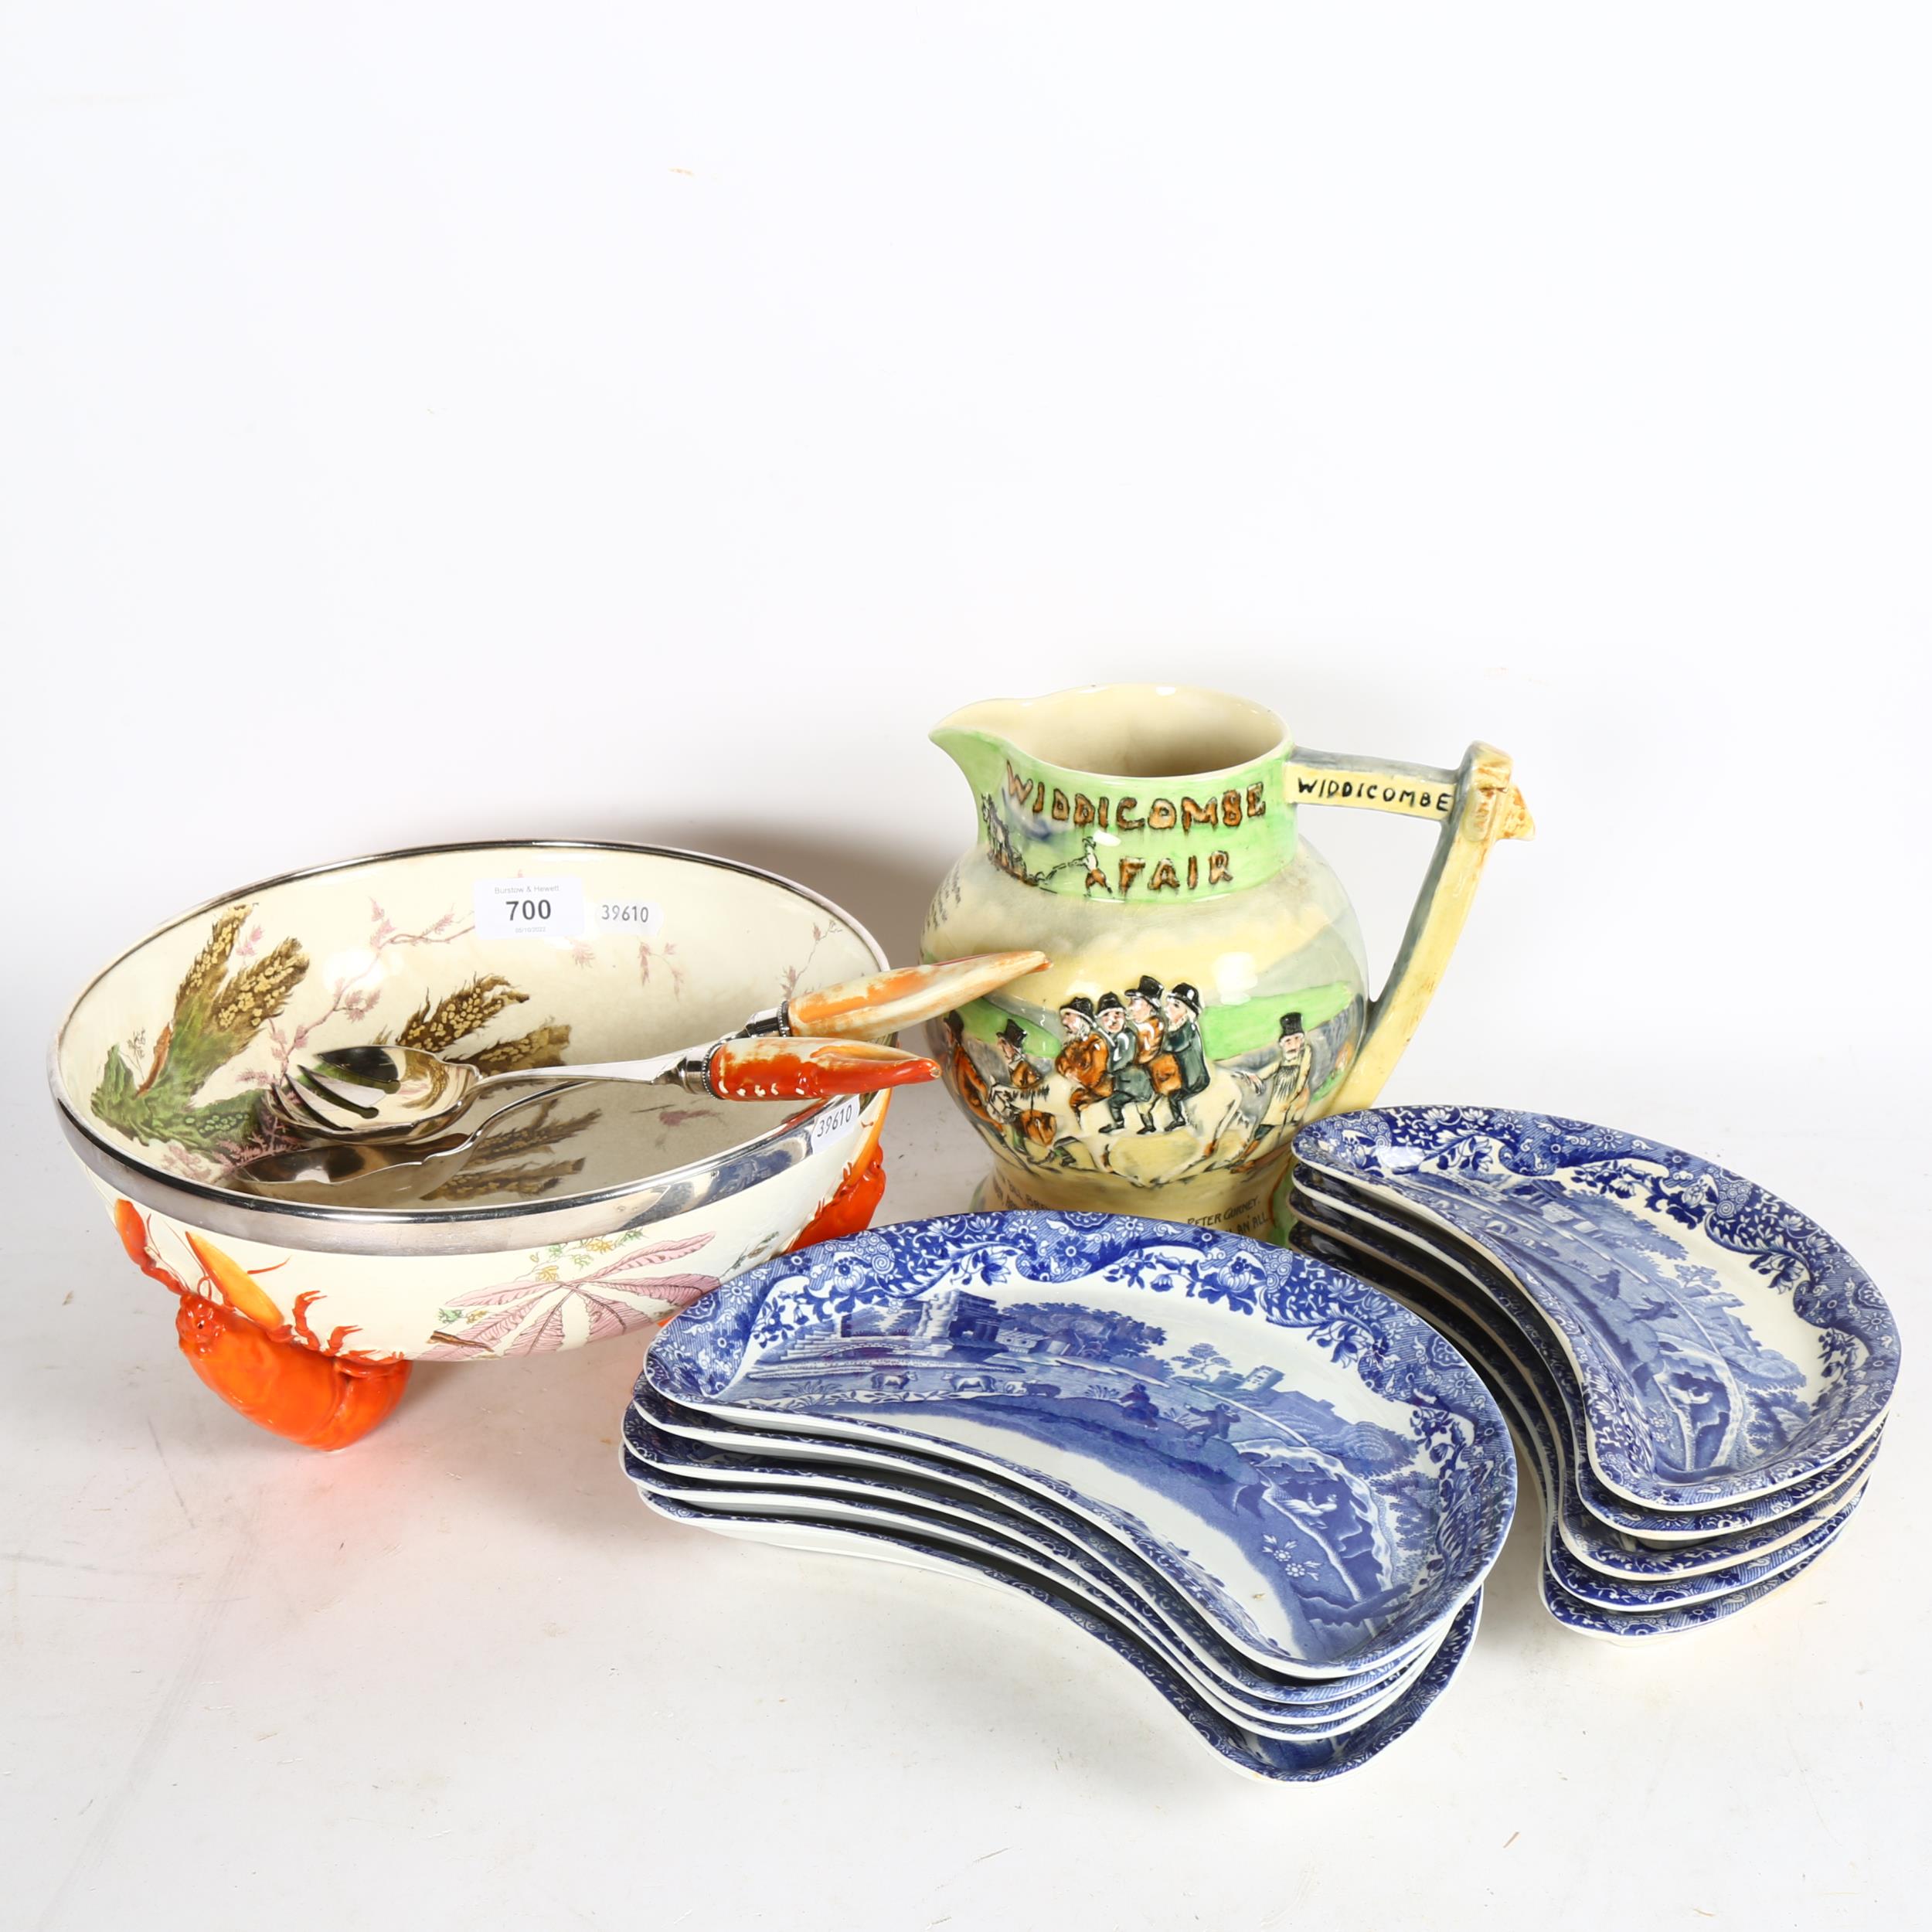 A Crown Devo Widdicombe Fair musical jug, Victorian Wedgwood bowl with lobster feet and matching